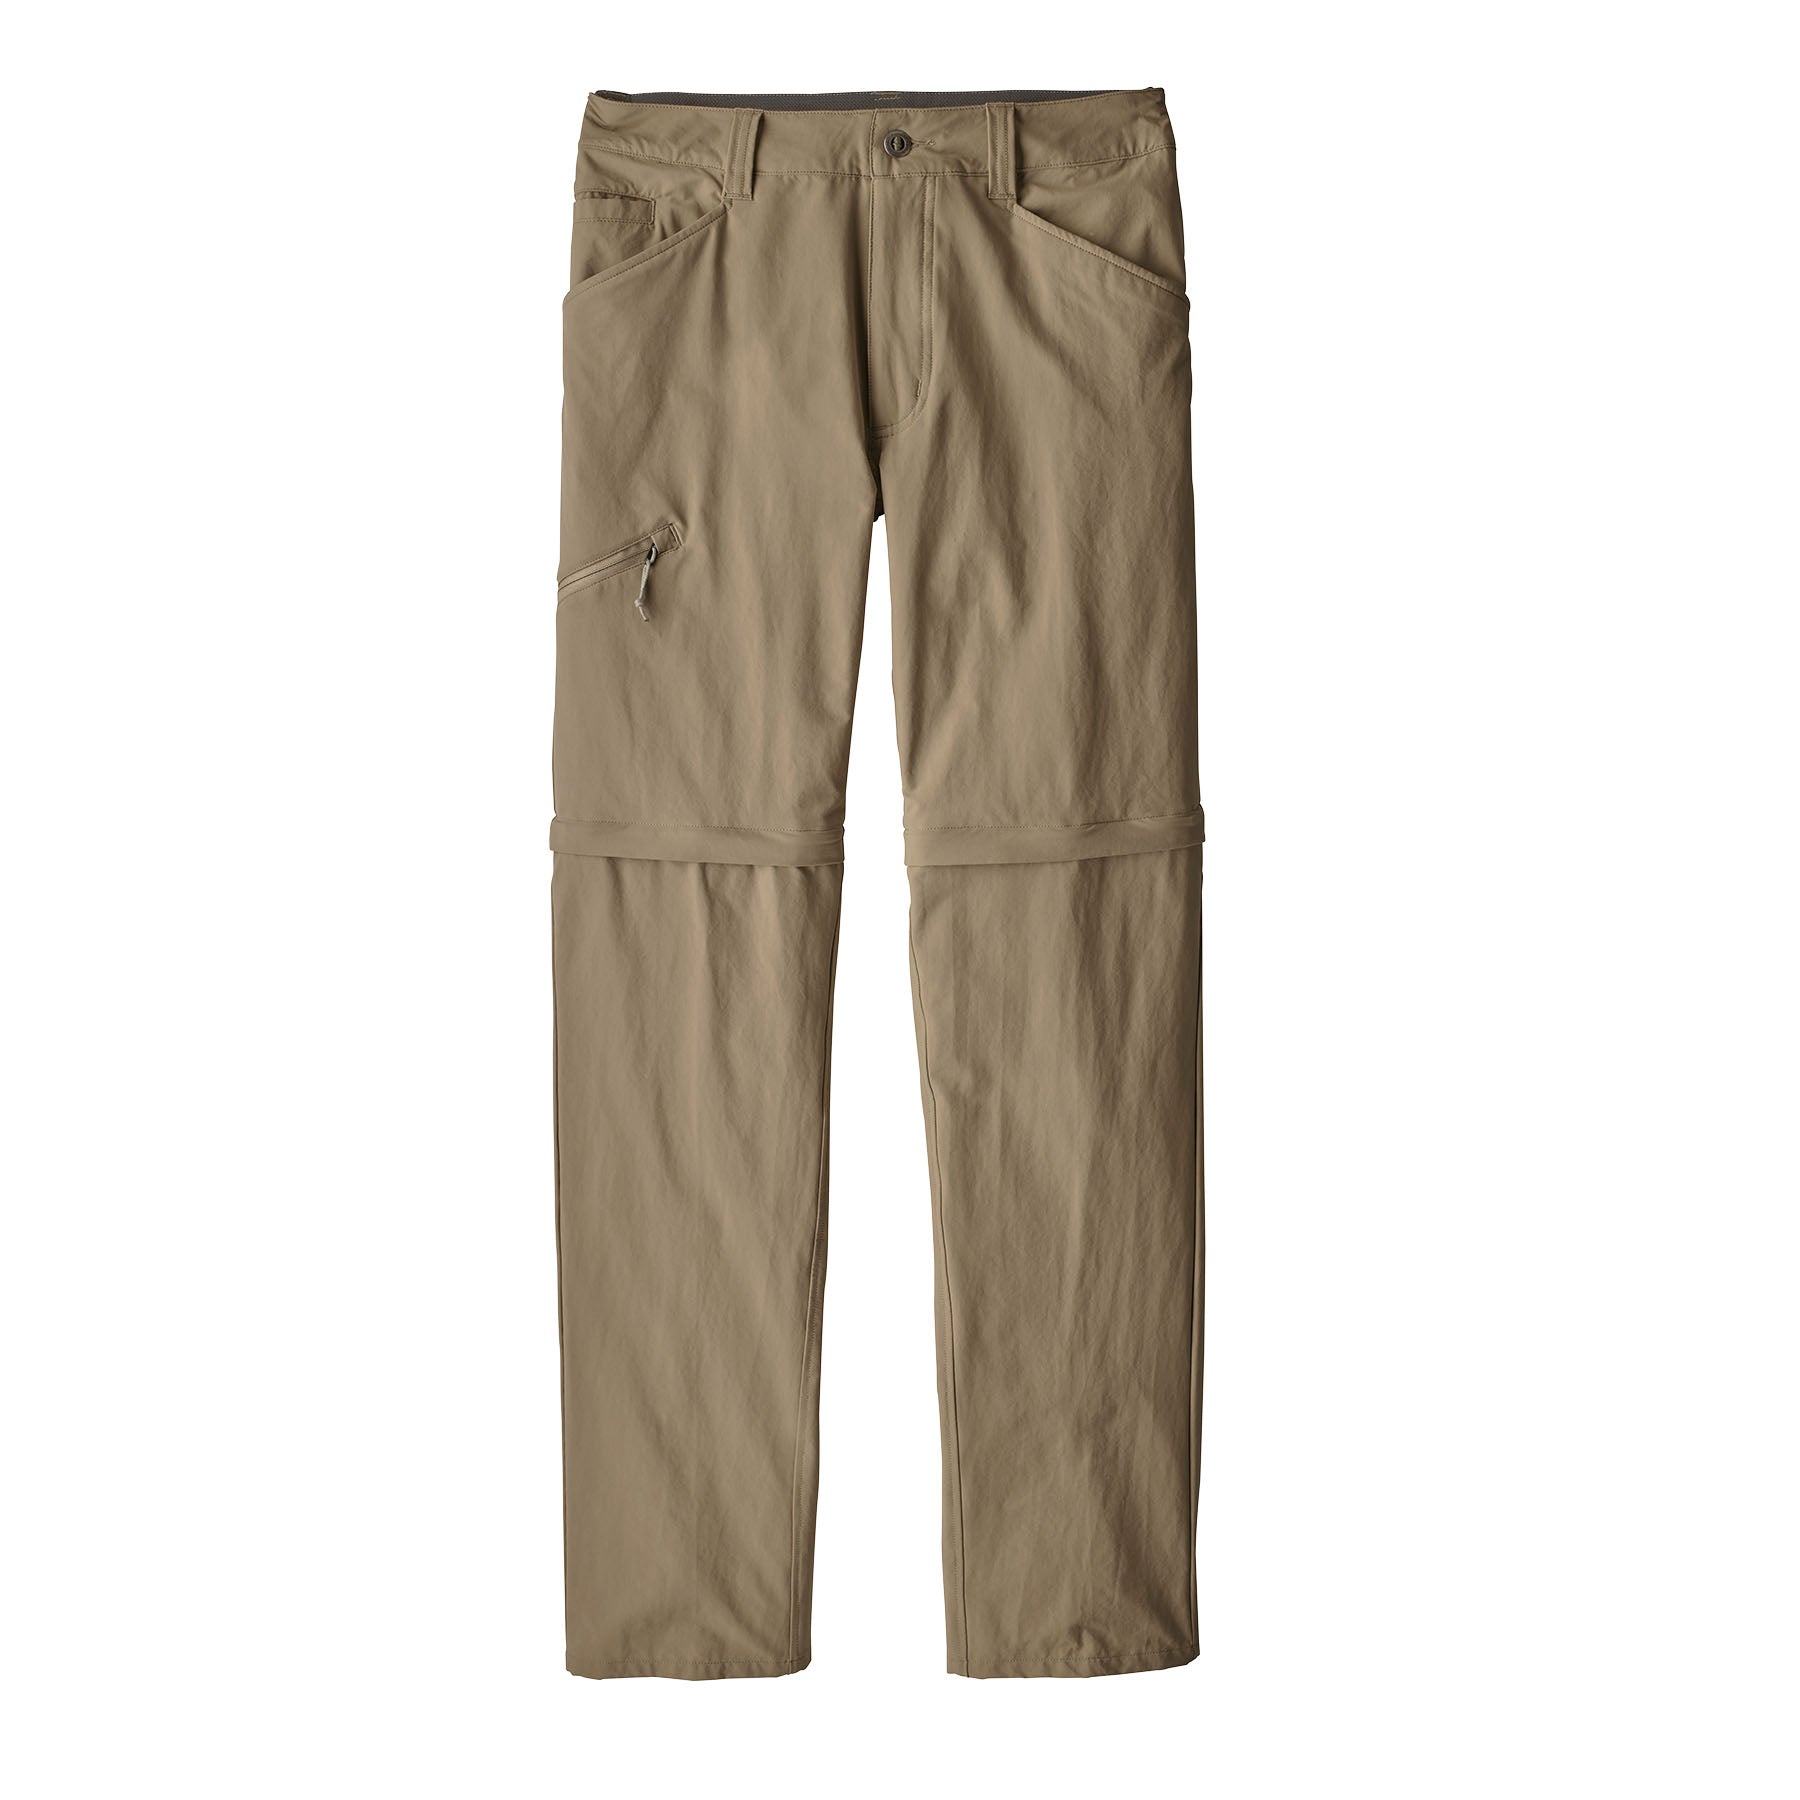 Men's Bottoms - Forests, Tides, and Treasures